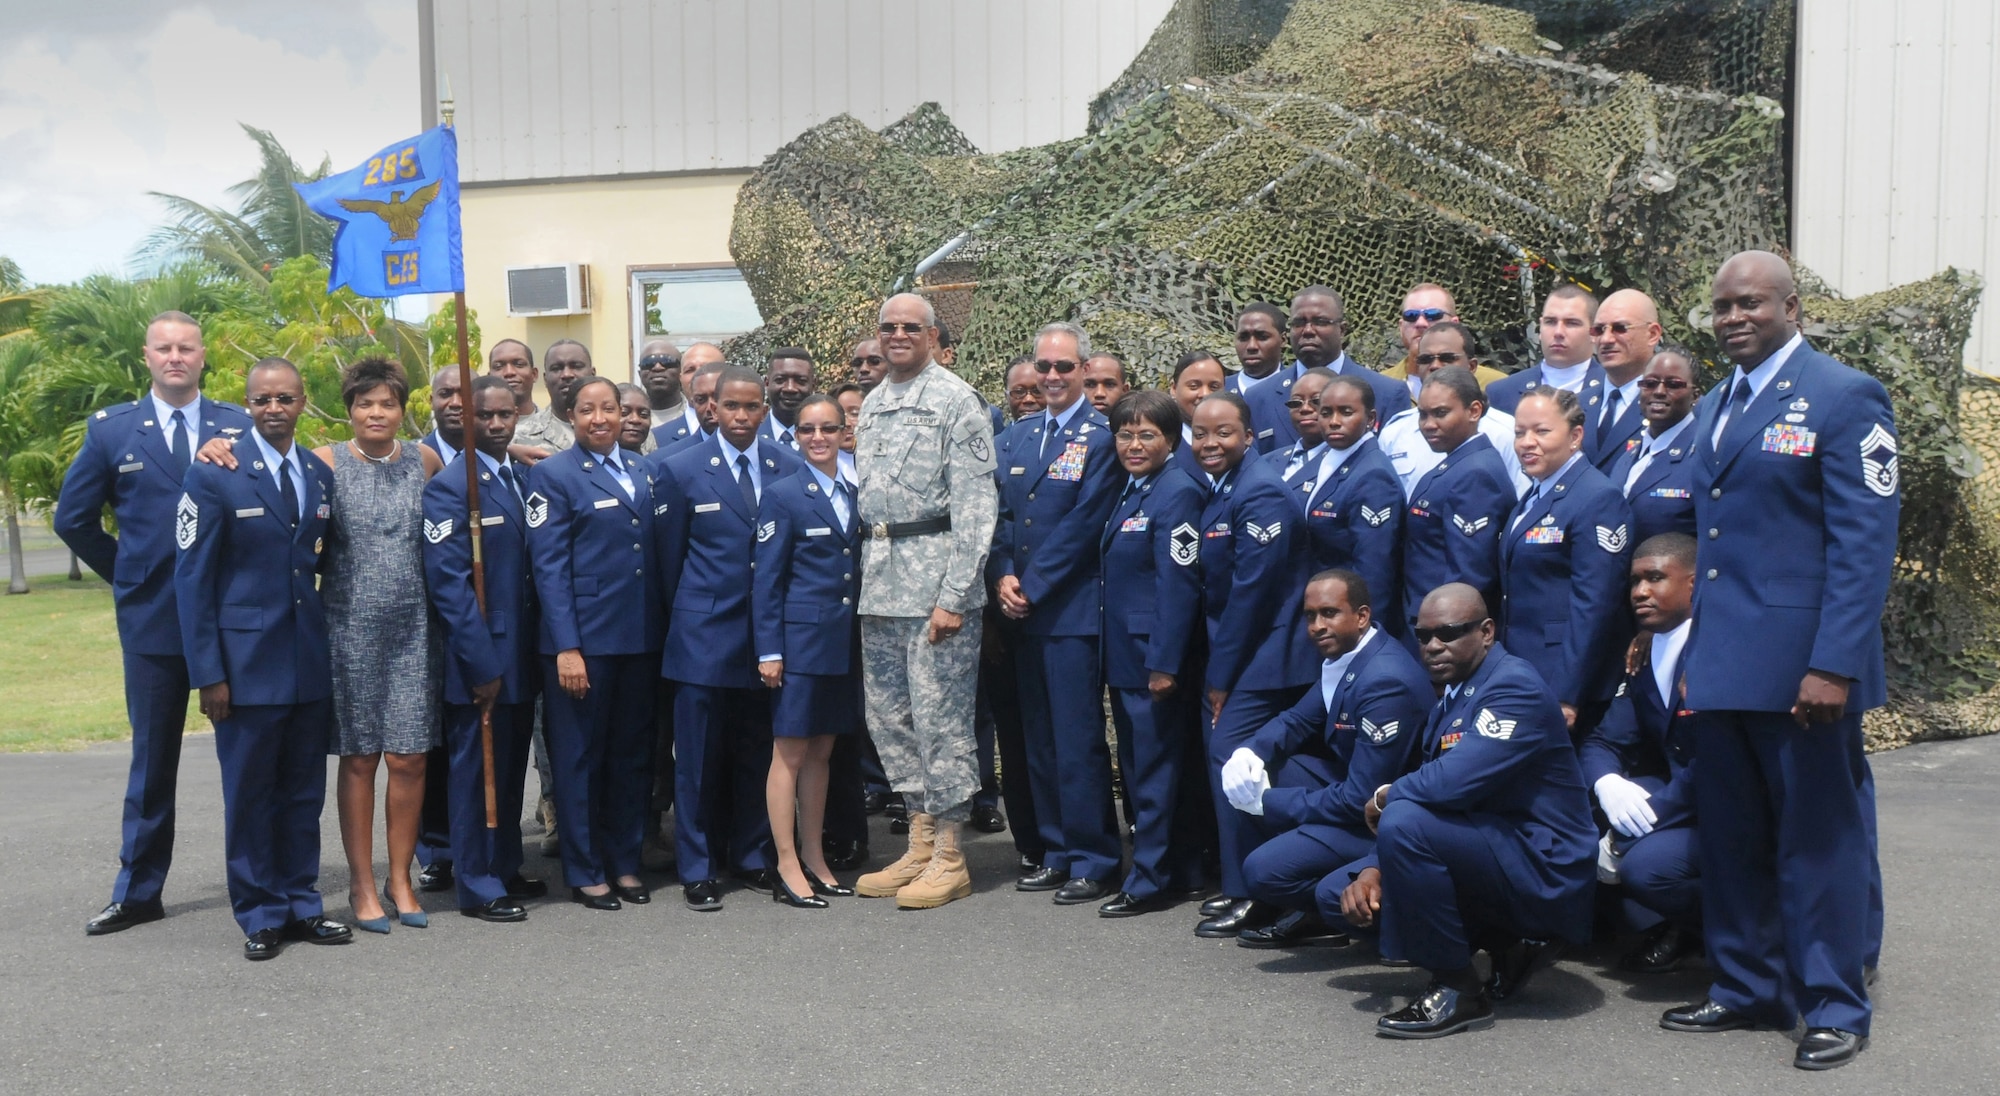 Maj. Gen. Renaldo Rivera, the adjutant general of the Virgin Islands National Guard and past and present unit members of the 285th Civil Engineering Squadron pose for a group shot after its re-designation ceremony at the Virgin Islands Air National Guard facility, Manning Hill, St. Croix, Mar. 3. The unit, formerly known as the 285th Combat Communications Squadron, transitioned from a communications unit to a rapidly deployable engineer unit. The Virgin Islands Air National Guard recently celebrated its 32nd birthday in February.  (VING photo by Sgt. Juanita Philip-Mathurin) 